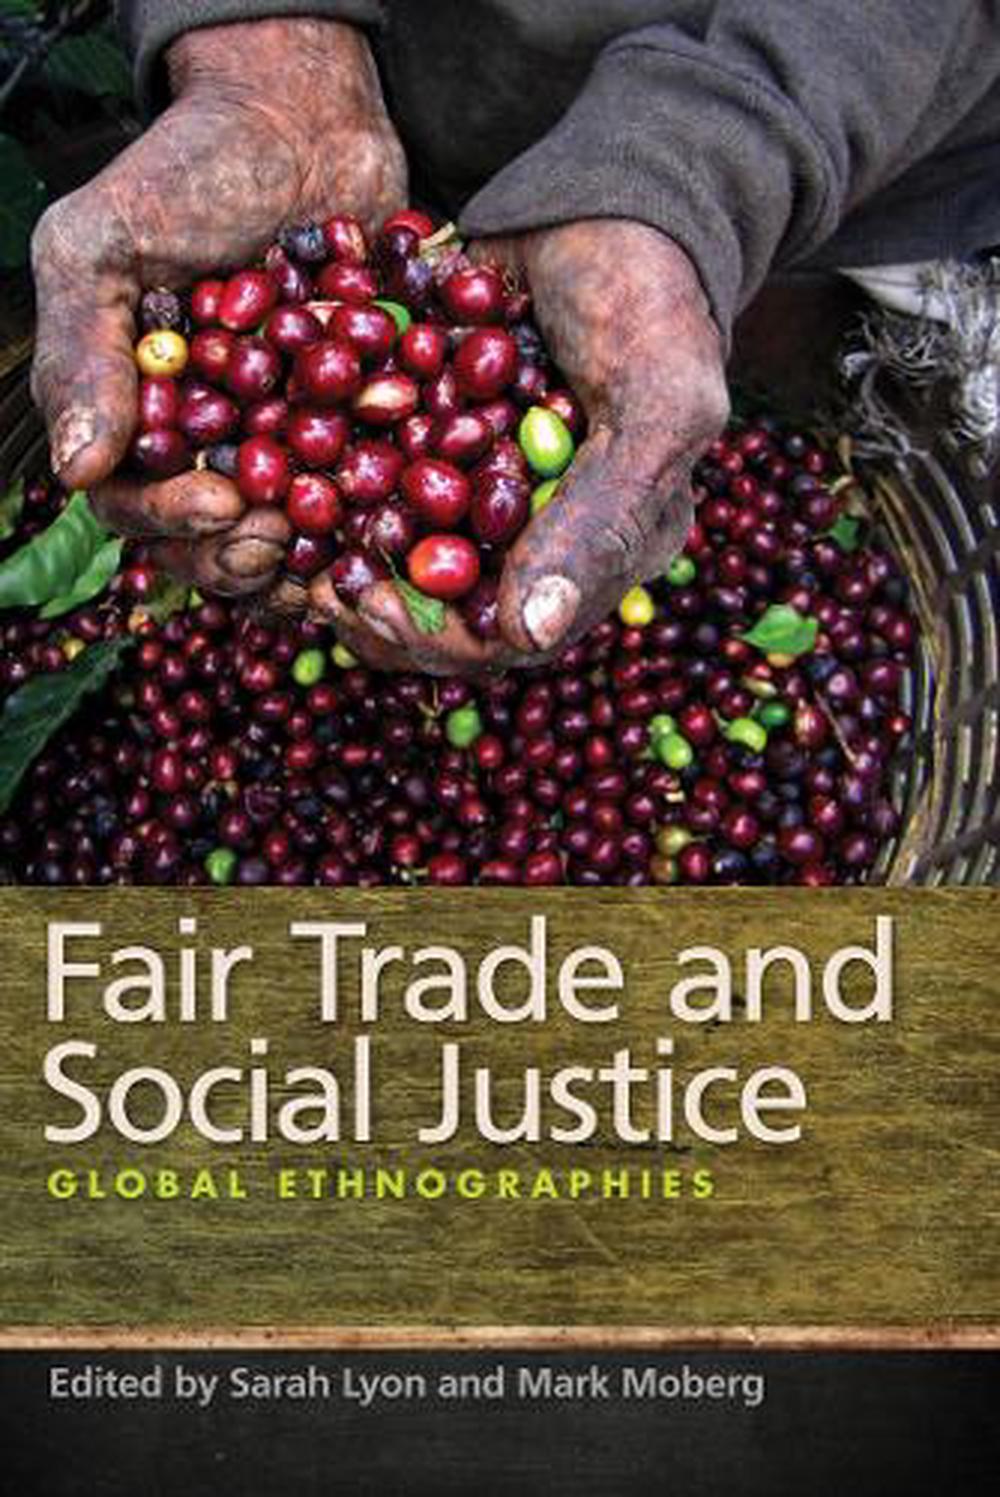 Fair Trade and Social Justice Global Ethnographies by Mark Moberg